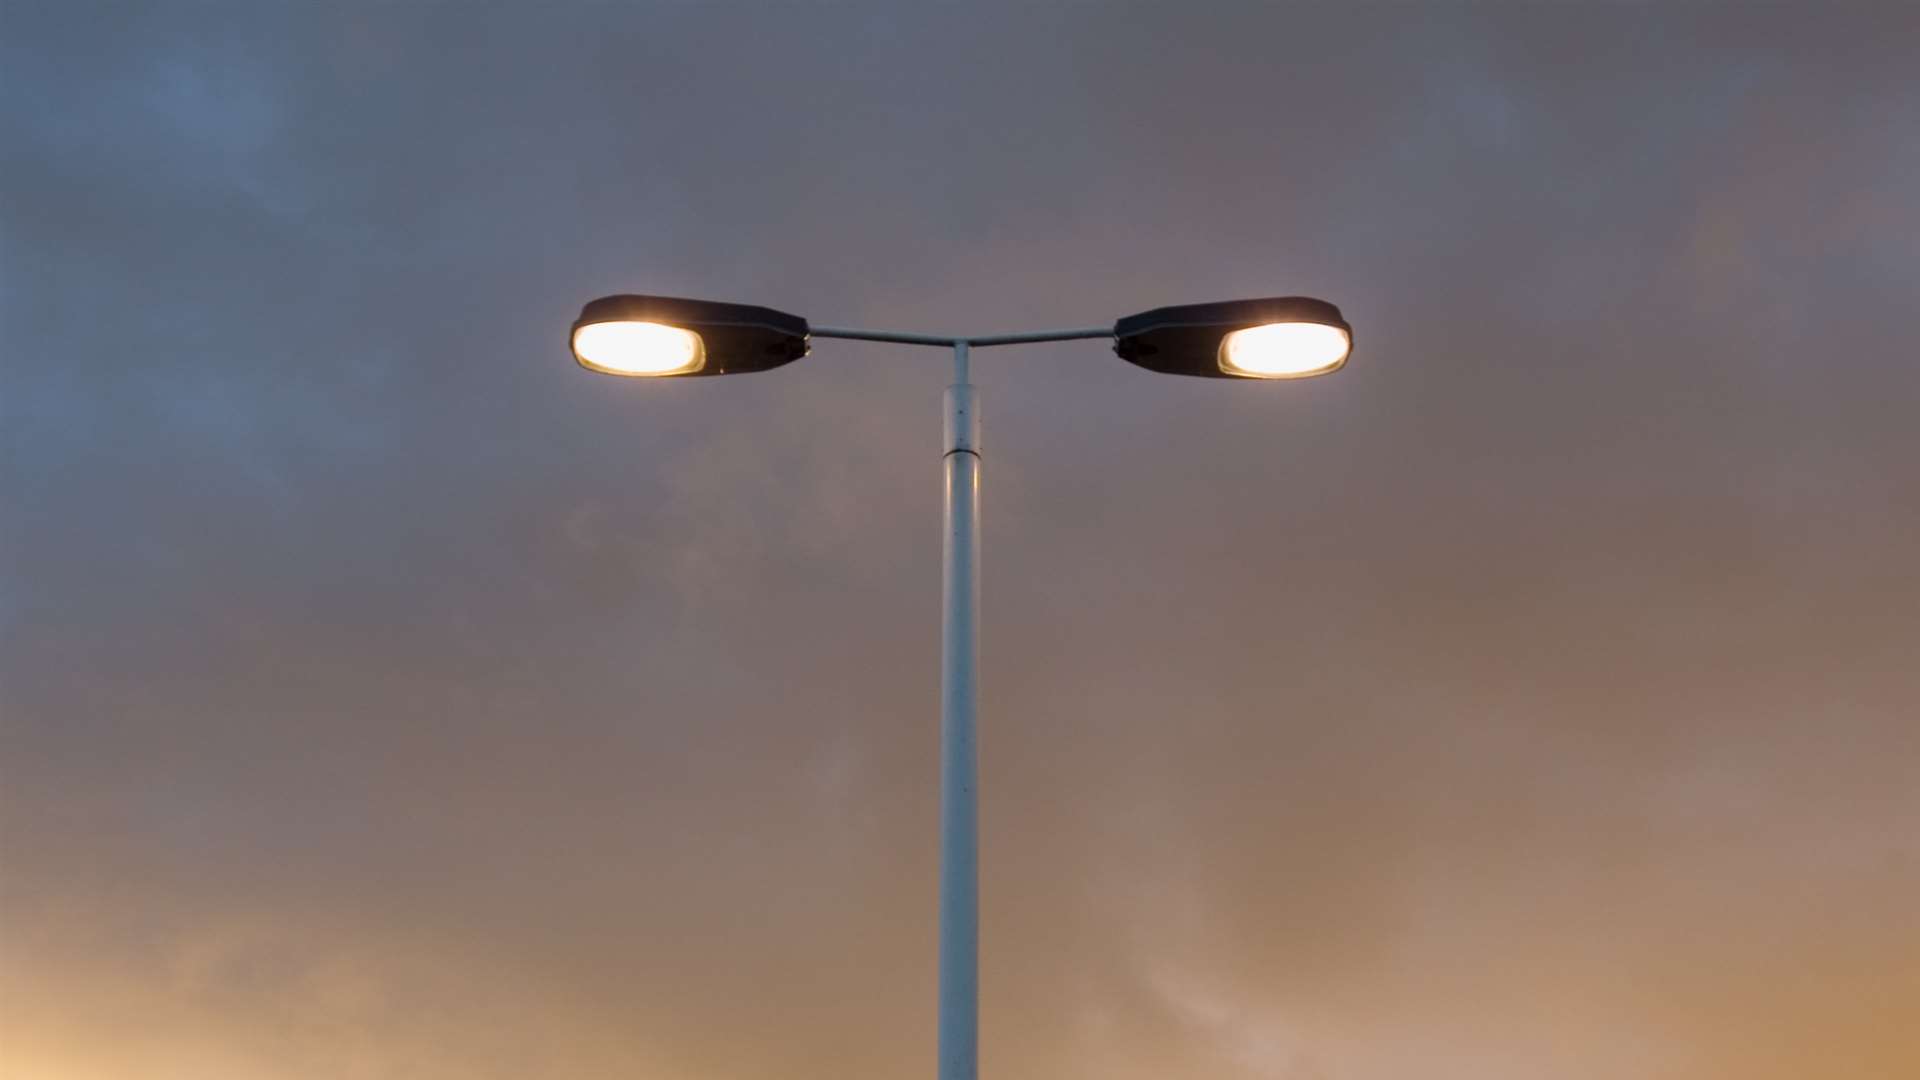 Kent County Council says it has a "procedure" for repairing street lights.